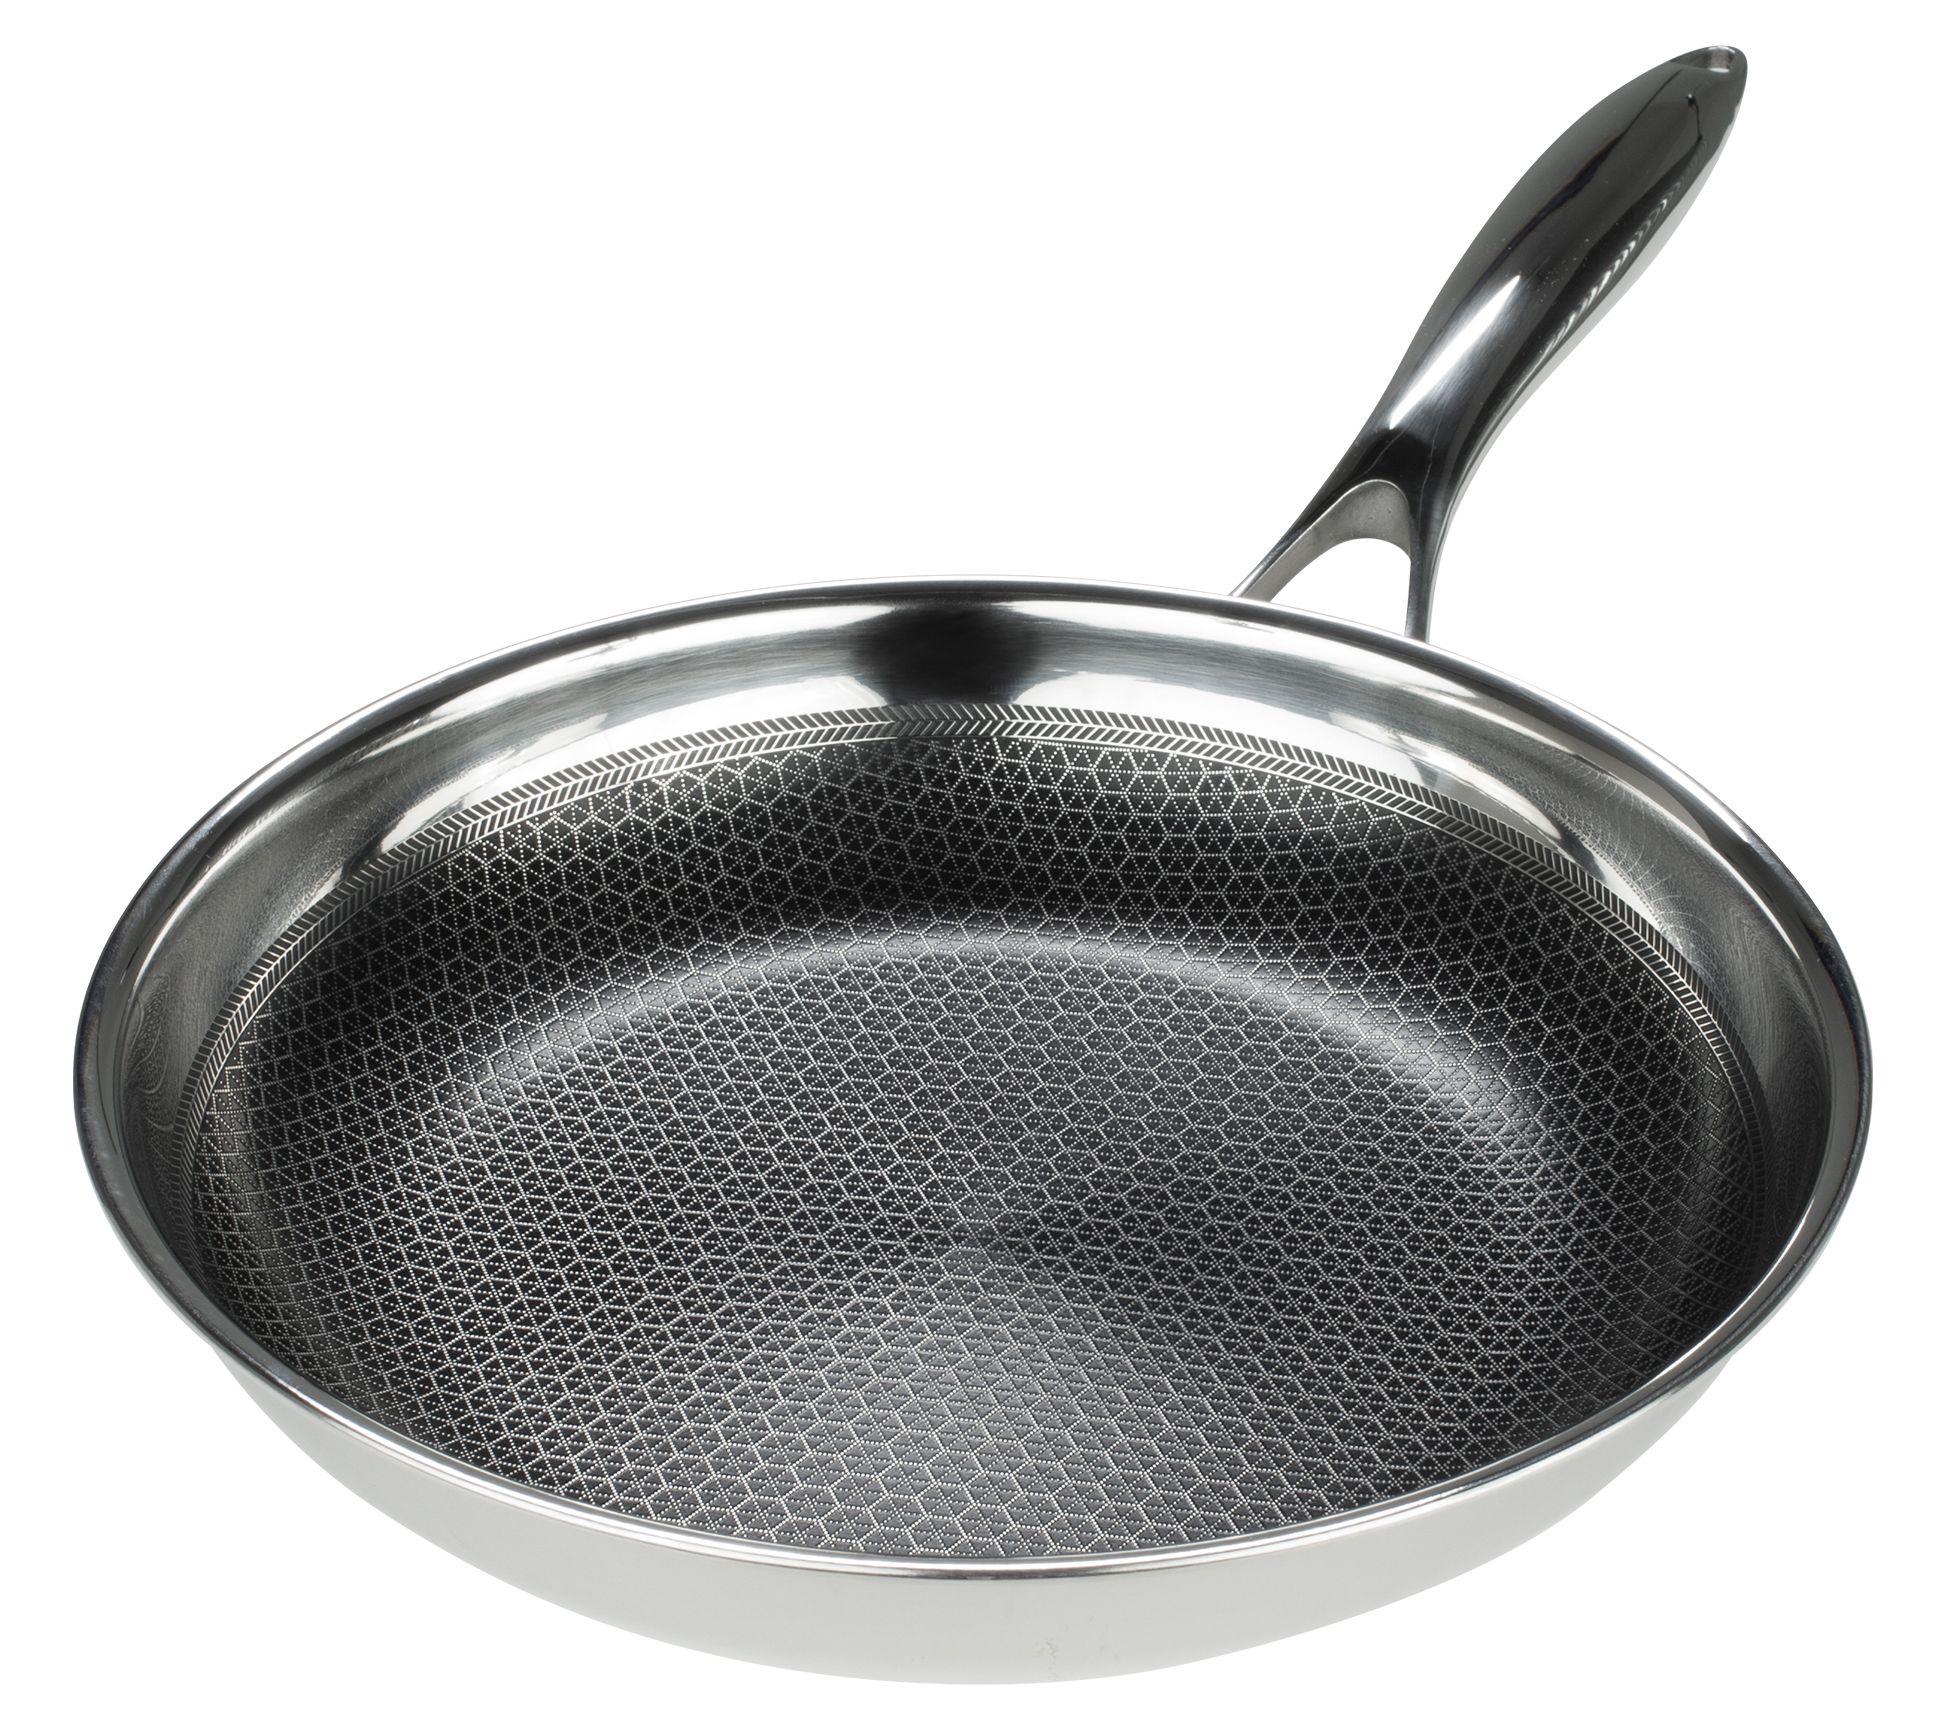 This is the nonstick cookware Gordon Ramsay uses (it's seriously strong  stuff)